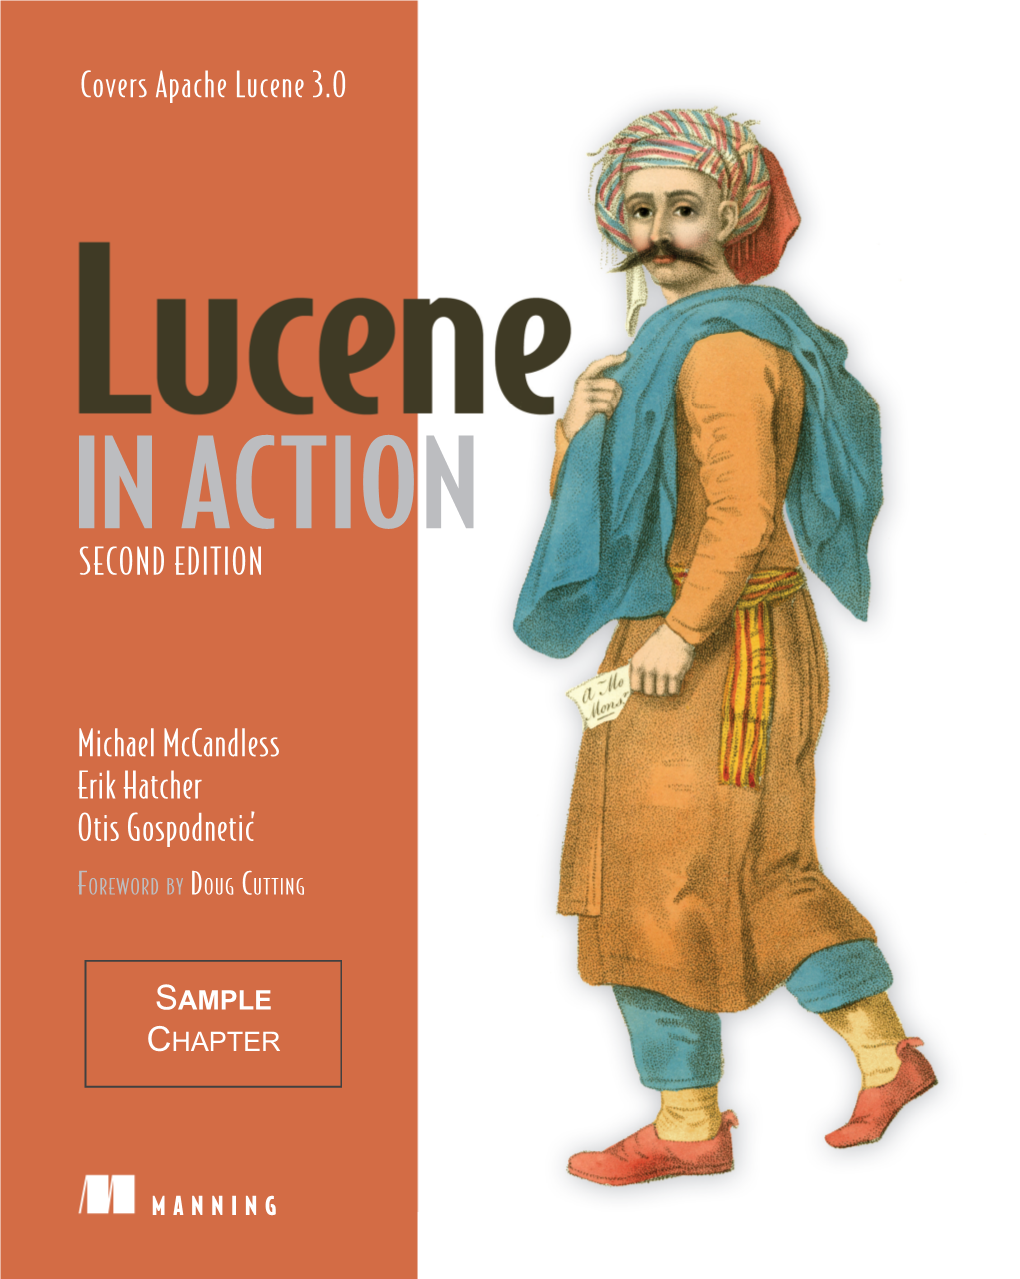 Lucene in Action, Second Edition by Michael Mccandless, Erik Hatcher, and Otis Gospodnetic´